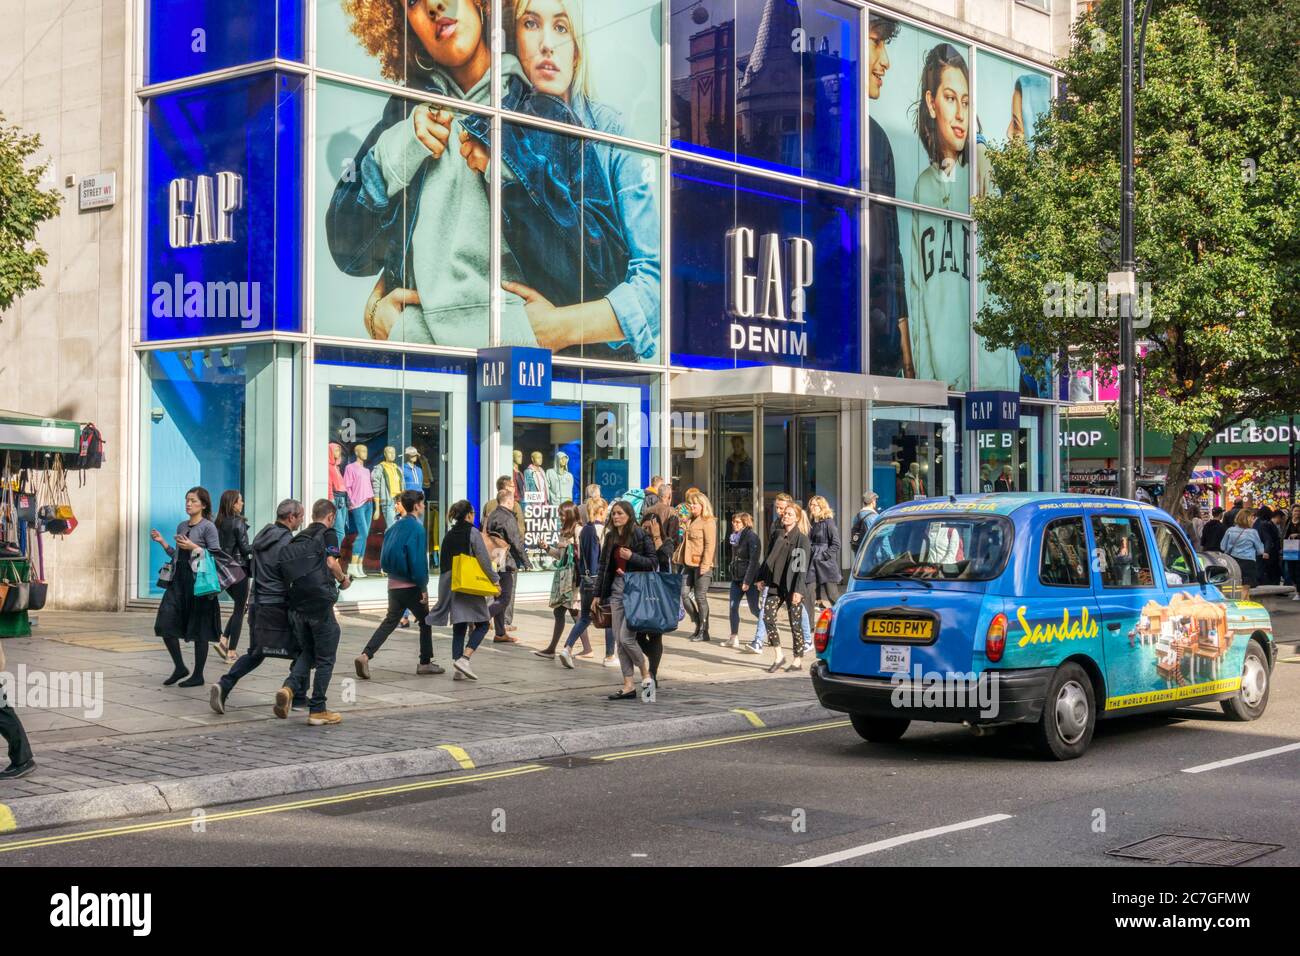 Branch of Gap clothing shops in Oxford Street, London Stock Photo - Alamy